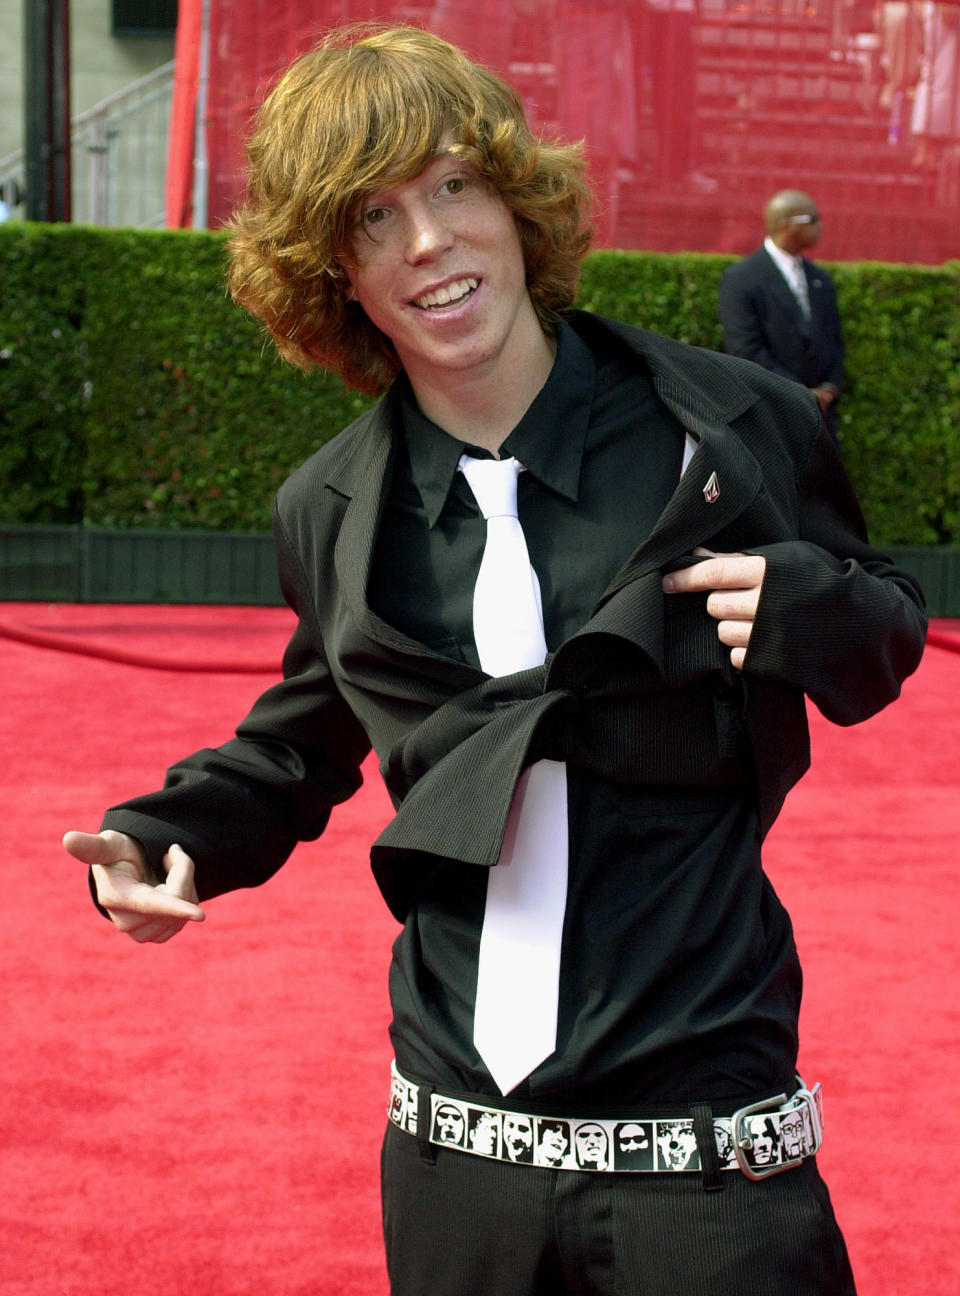 <p>Snowboarder Shaun White shows off his belt as he arrives at the 11th annual ESPY Awards, Wednesday, July 16, 2003, in Los Angeles. The ESPY Awards honor the year’s top performances and sports moments. White is nominated for best action sports athlete. (AP Photo/Jerome T. Nakagawa) </p>